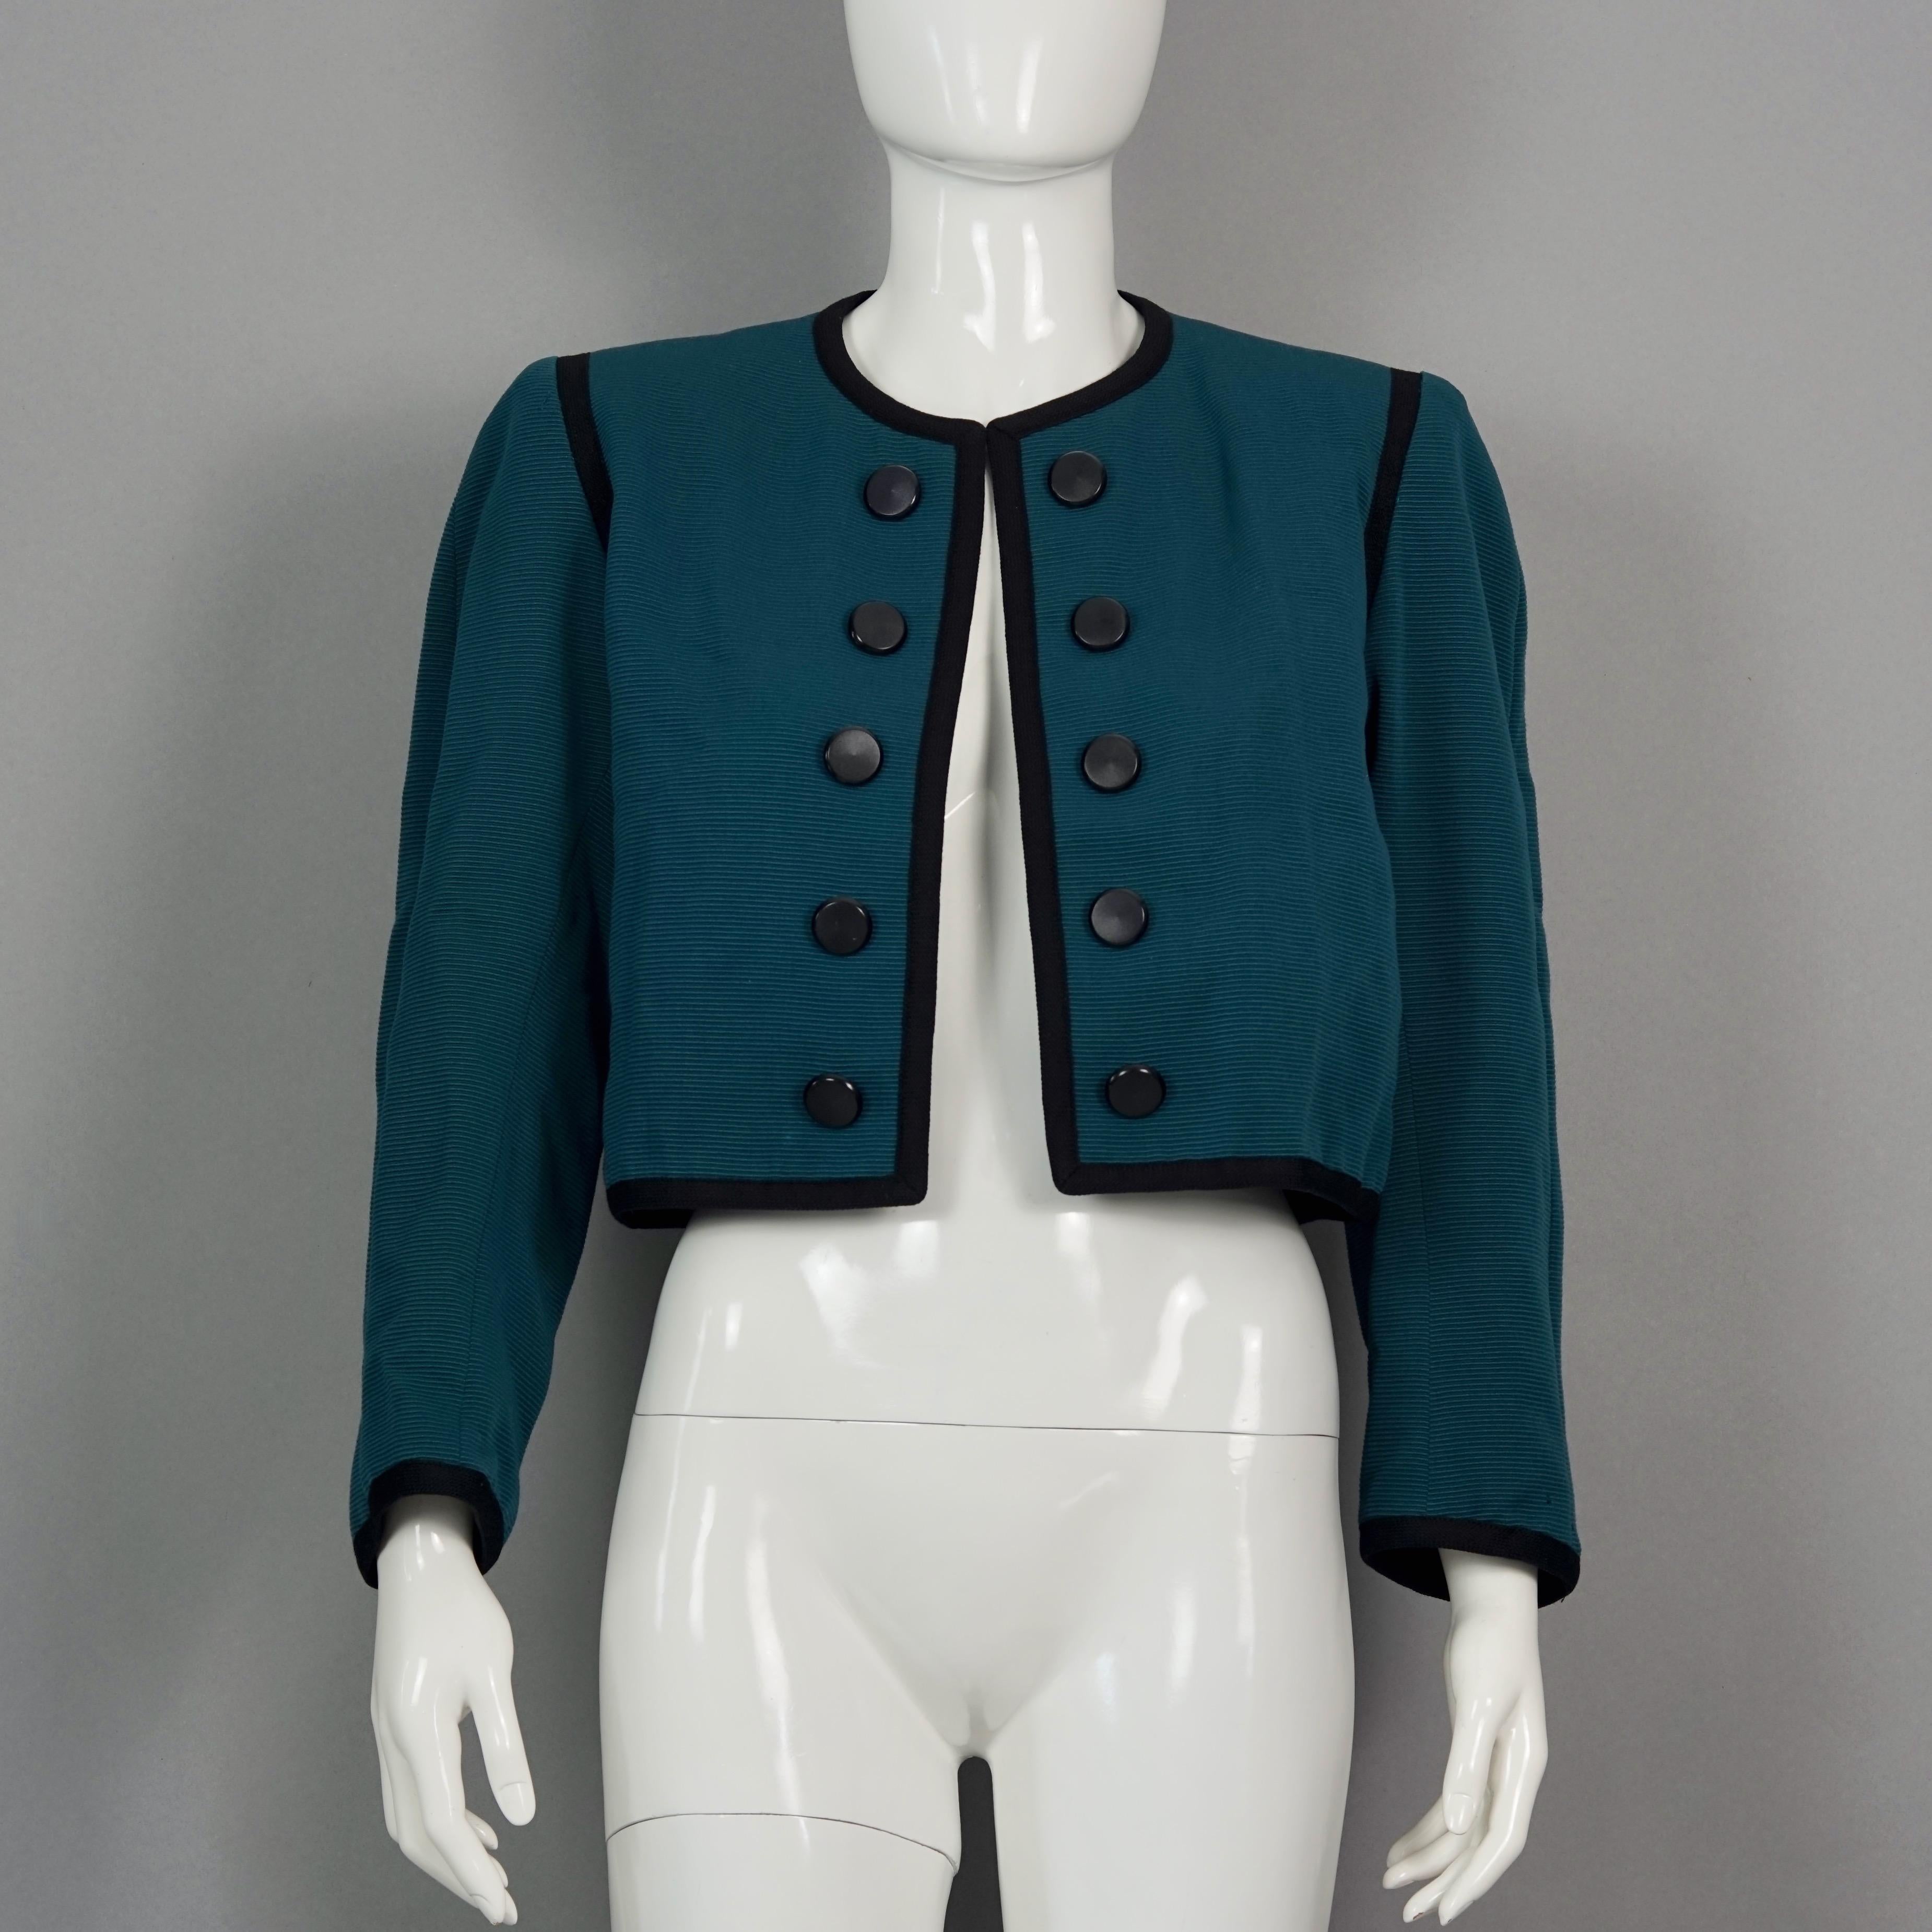 Vintage YVES SAINT LAURENT Ysl Rive Gauche Dark Teal Openwork Cropped Jacket

Measurements taken laid flat, please double bust and wast:
Shoulder: 15.35 inches (39 cm)
Sleeves: 21.25 inches (54 cm)
Bust: 20.07 inches (51 cm)
Waist: 18.11 inches (46